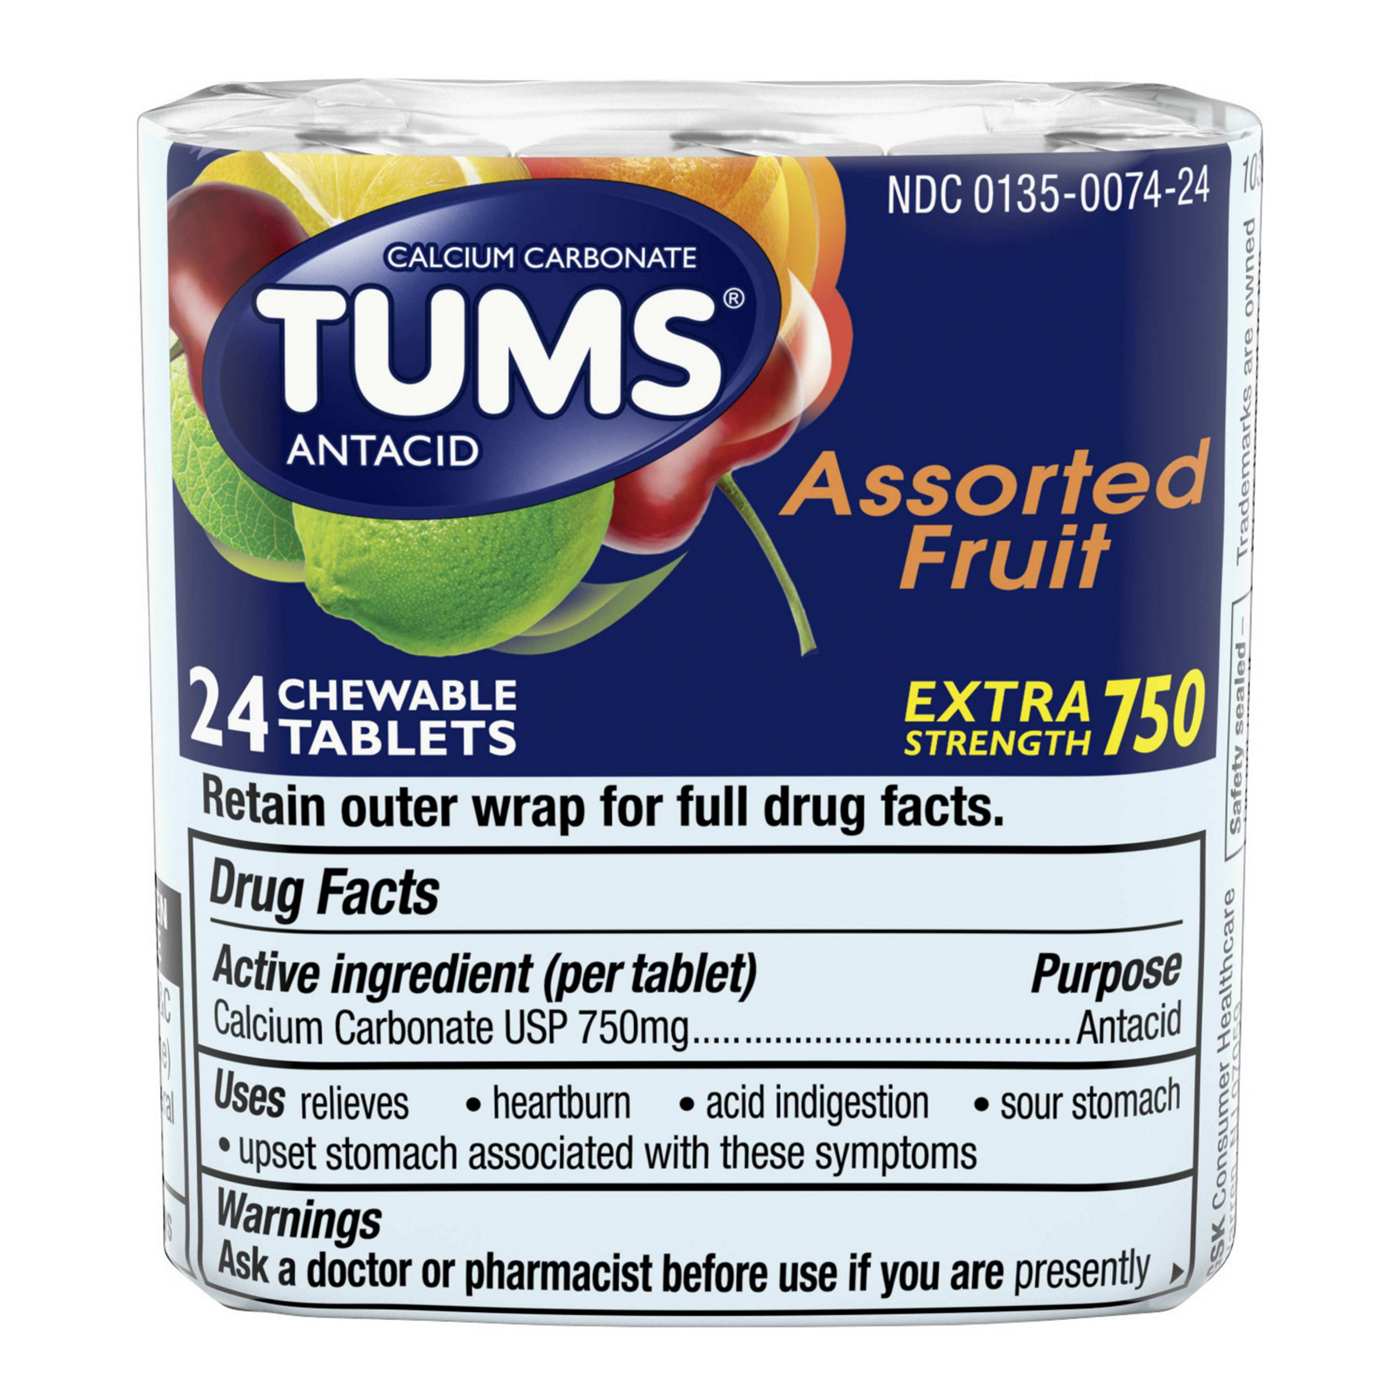 Tums Antacid Extra Strength Assorted Fruit Chewable Tablets; image 1 of 8